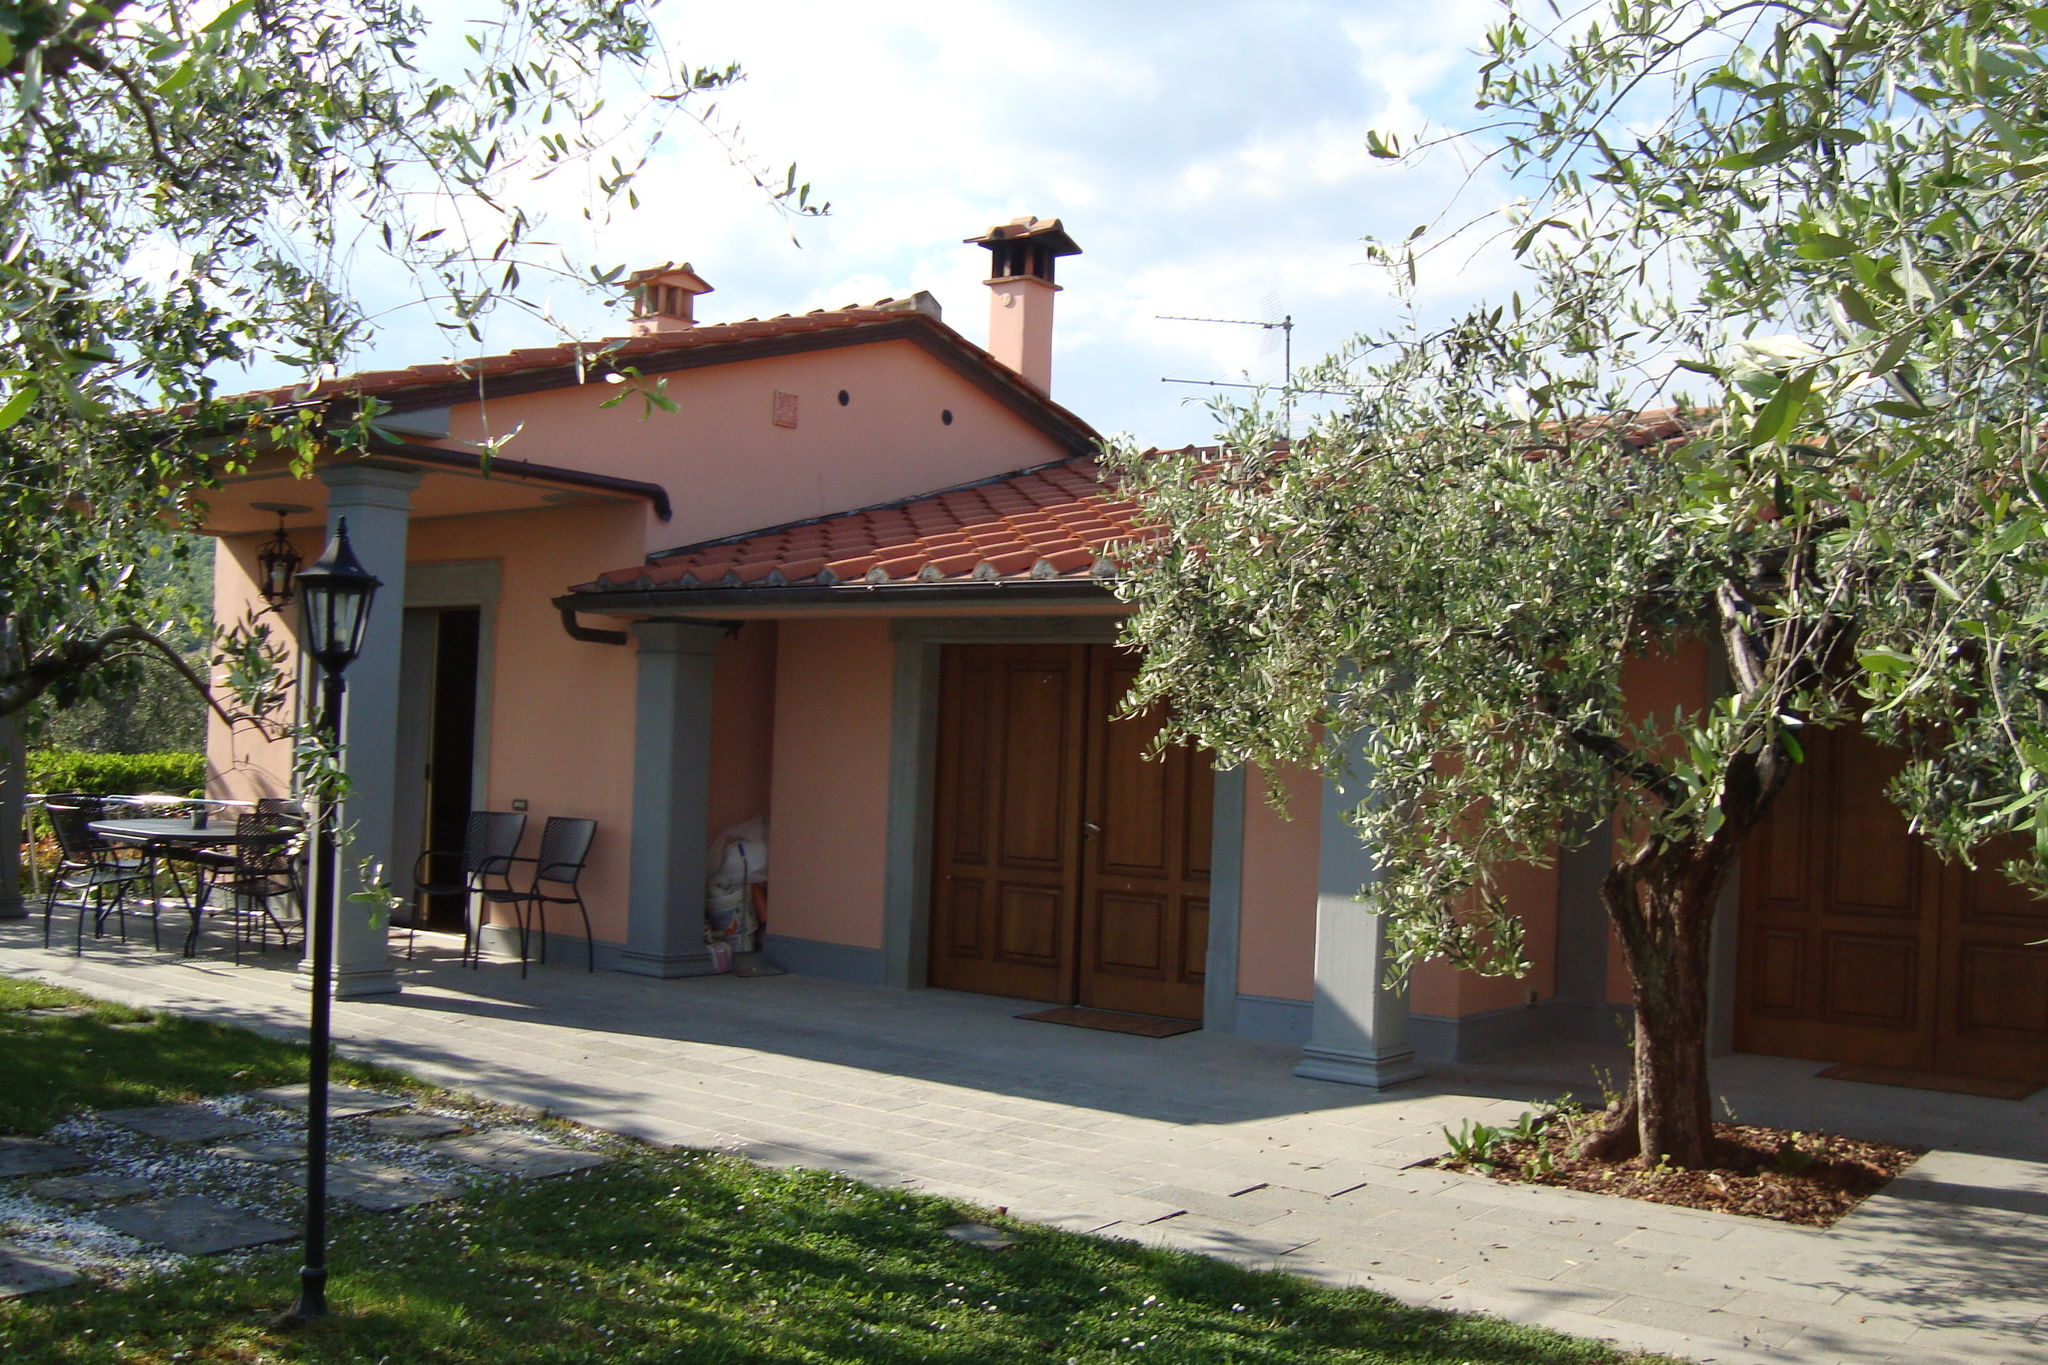 House in the Pistoia countryside with pool and garden, ideal for outdoor lunches